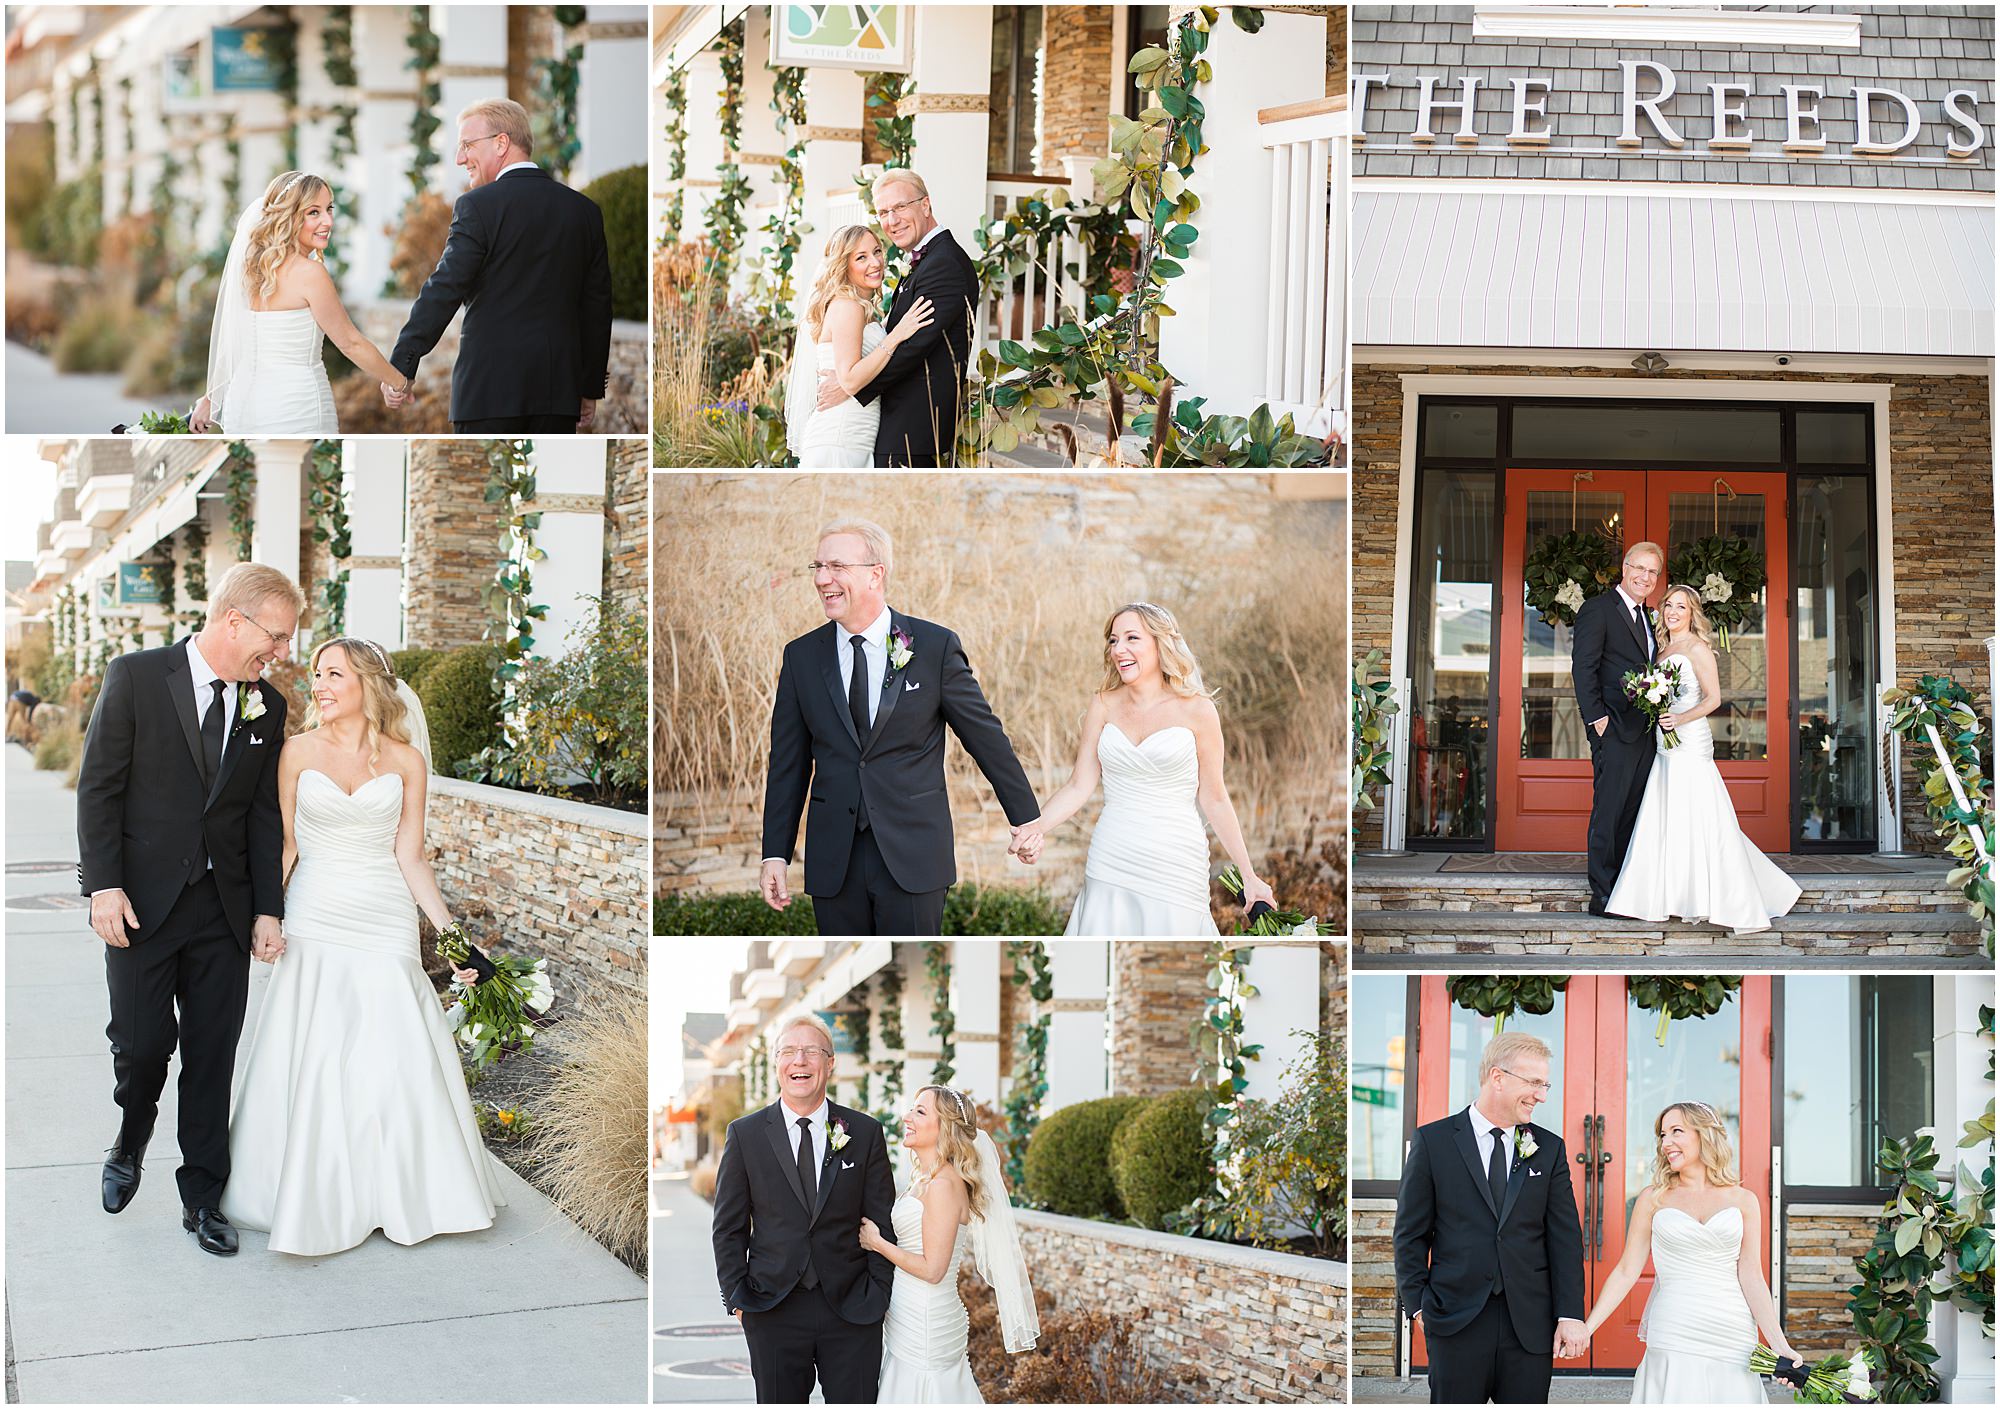 Outdoor bride and groom portraits at the Reeds at Shelter Haven